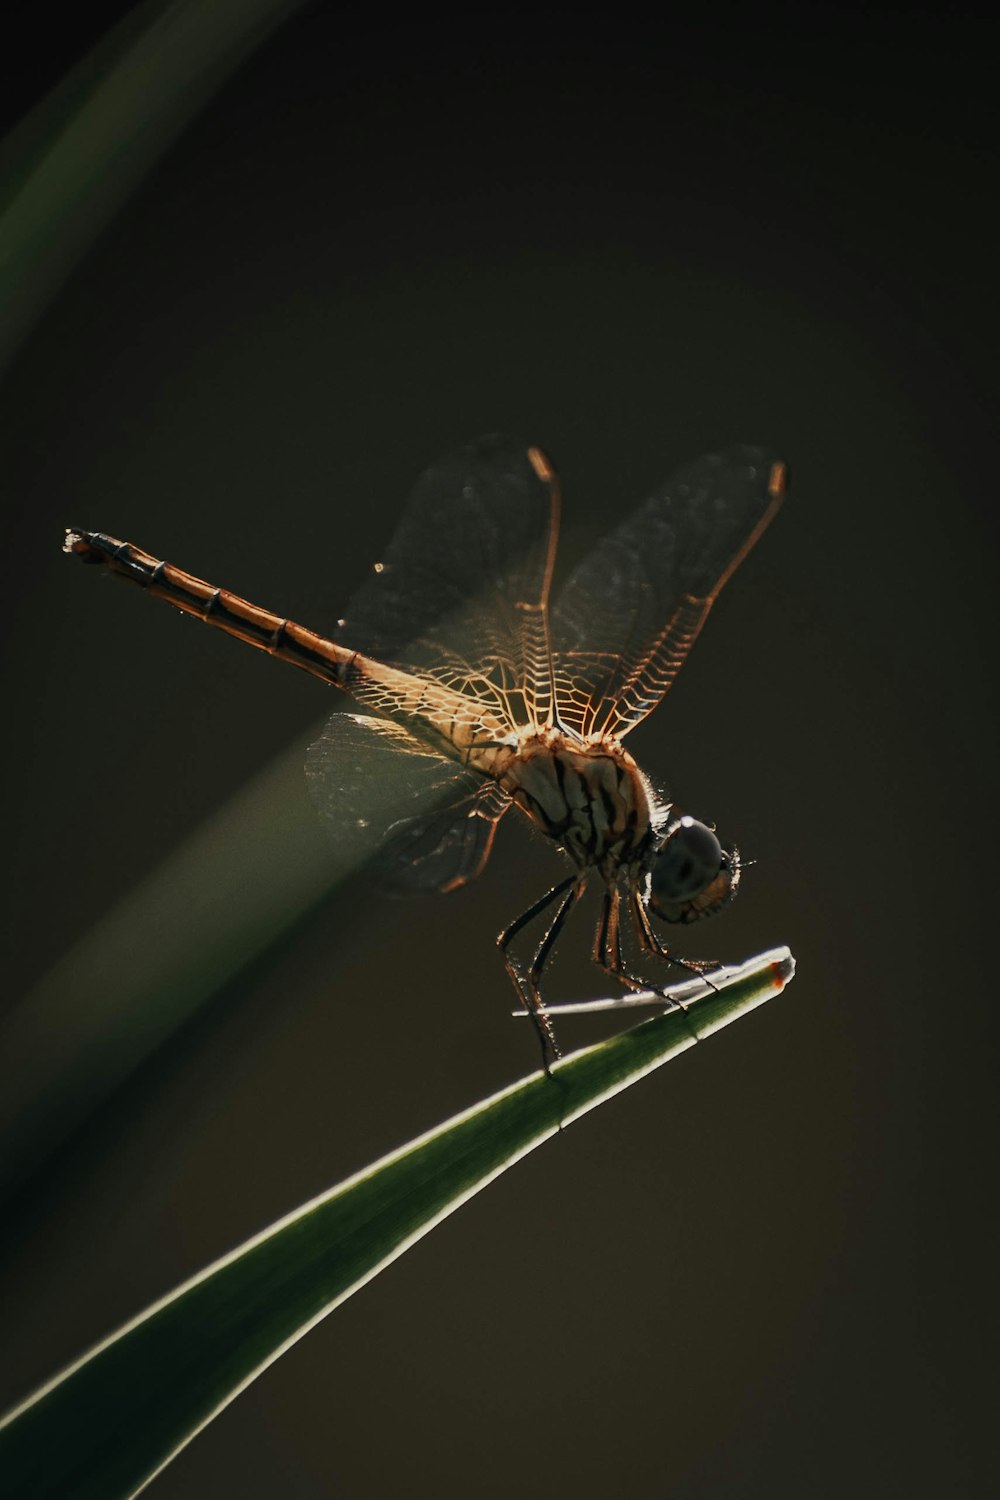 brown and black dragonfly on green leaf in close up photography